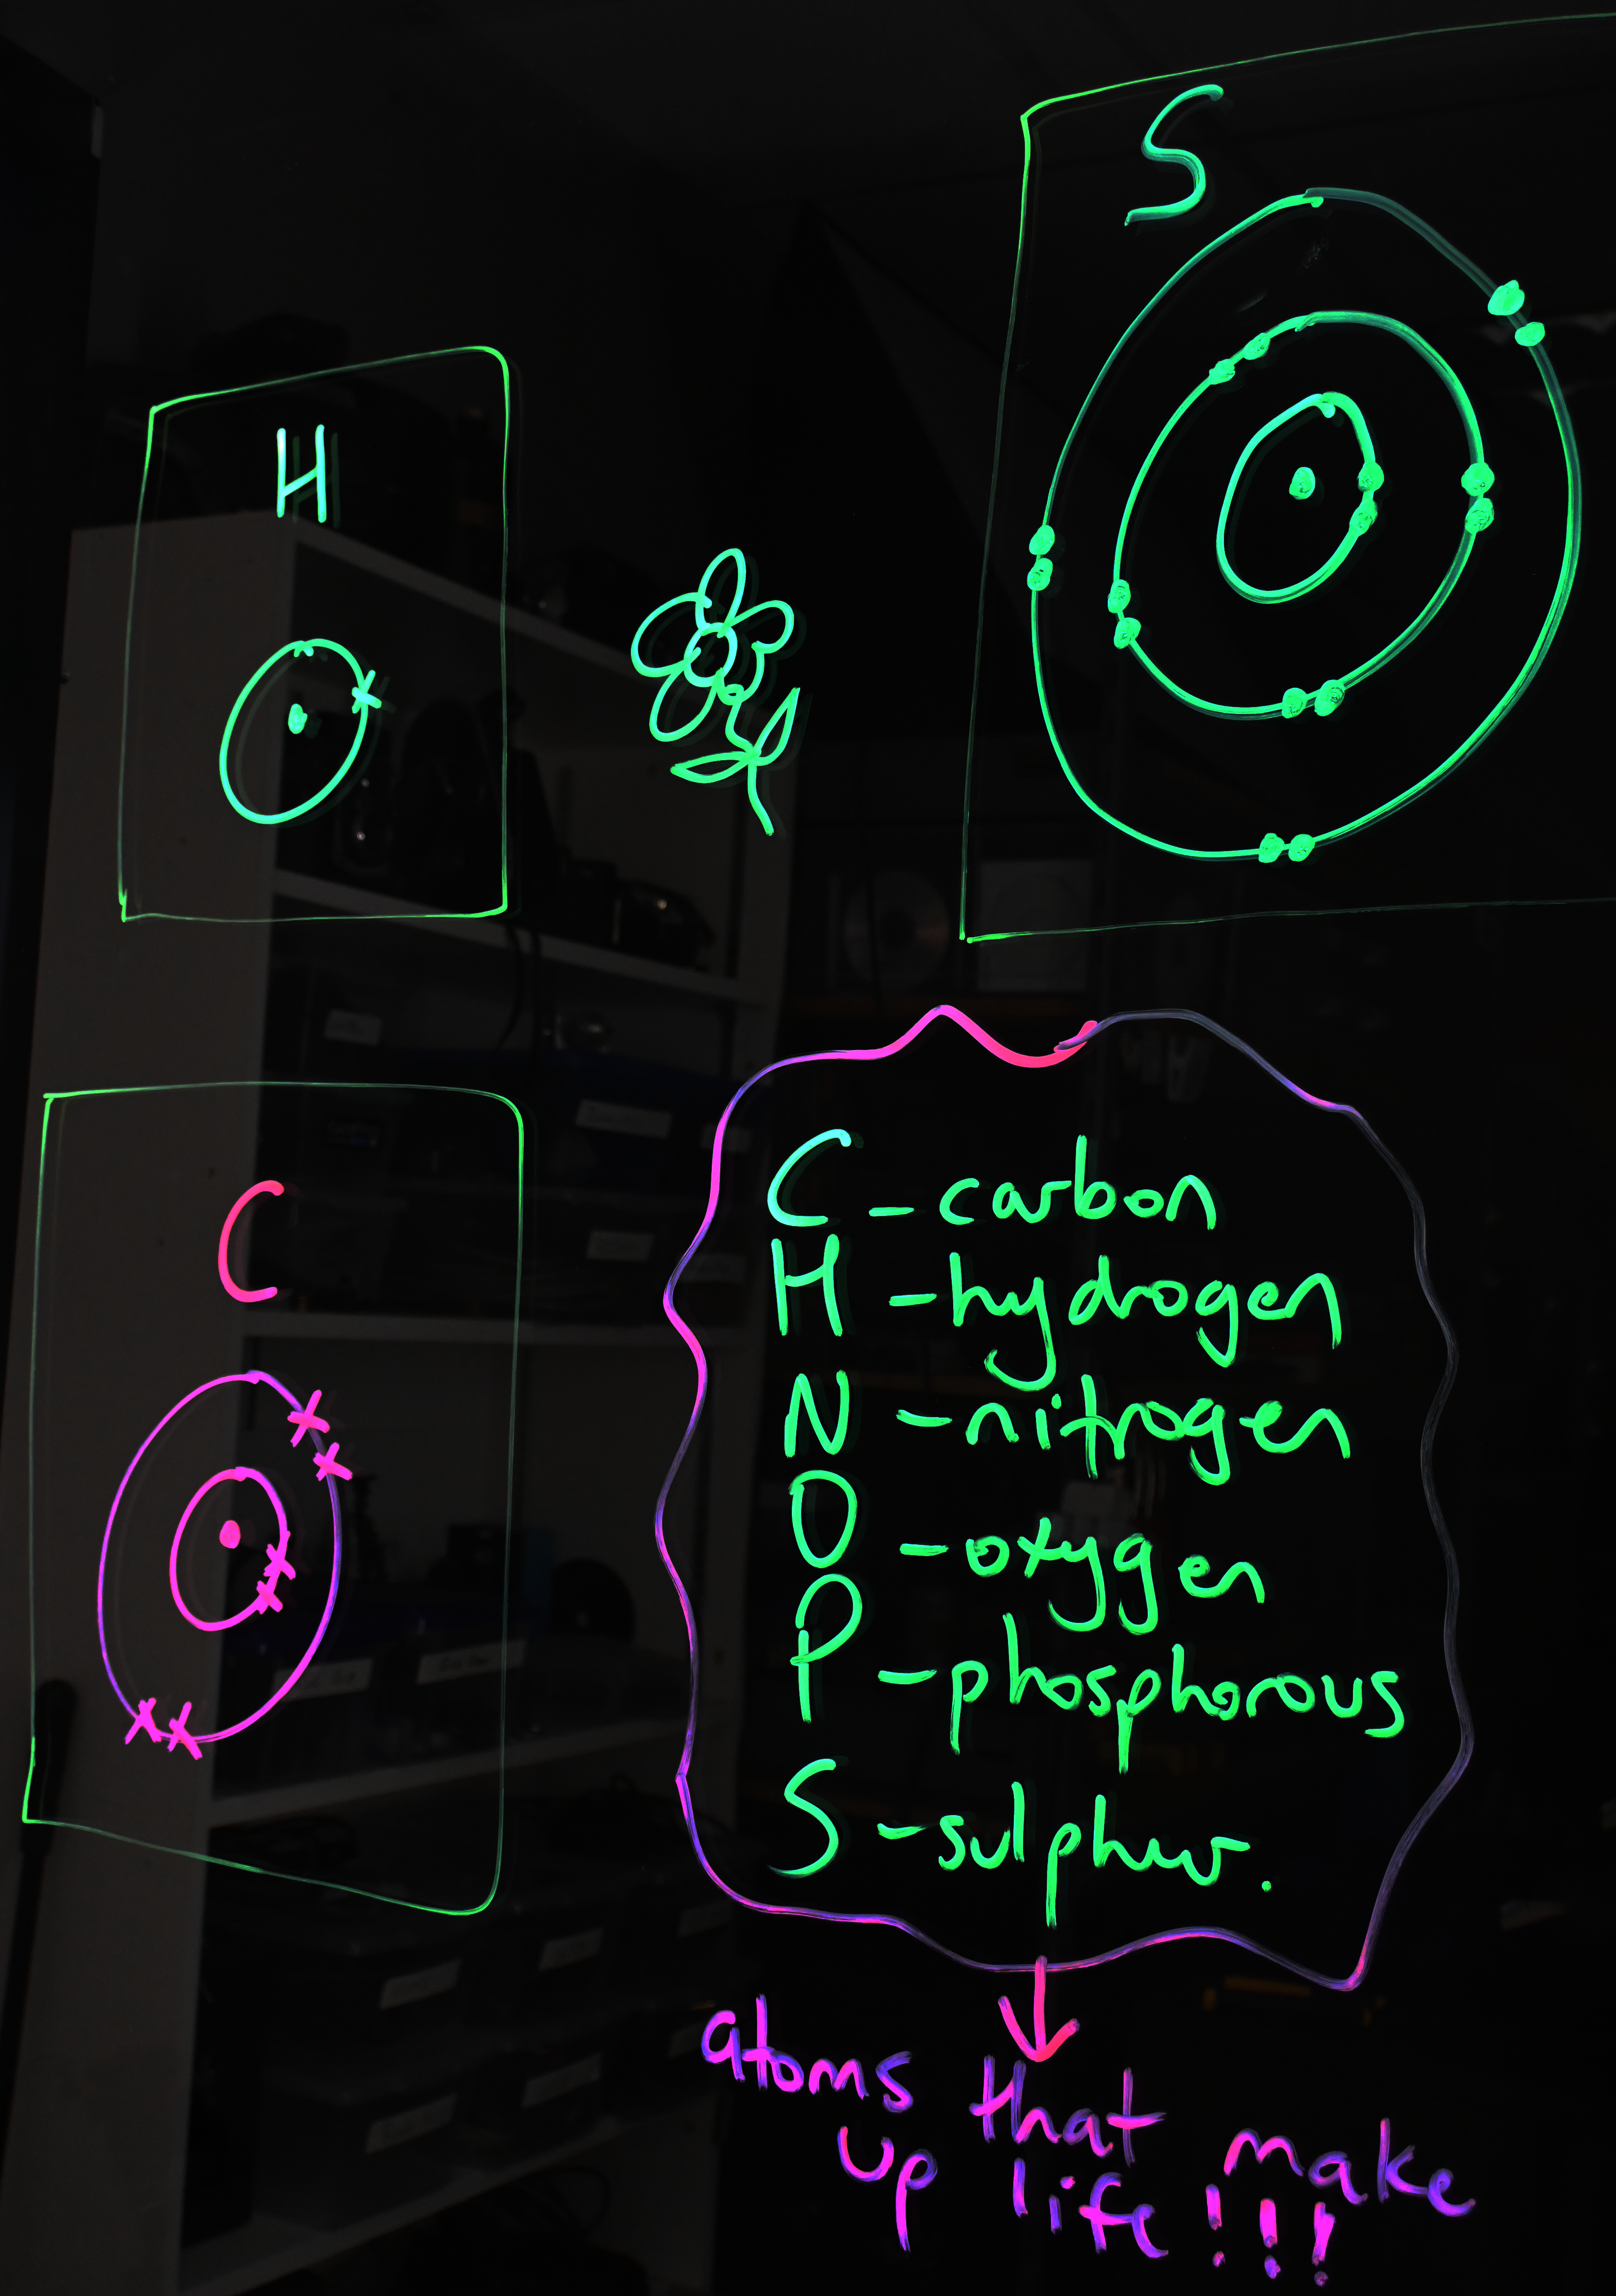 Writing on a light board shows Bohr models of carbon, hydrogen, and sulphur. There is a list of the six elements that make up life: carbon, hydrogen, nitrogen, oxygen, phosphorus, and sulphur.